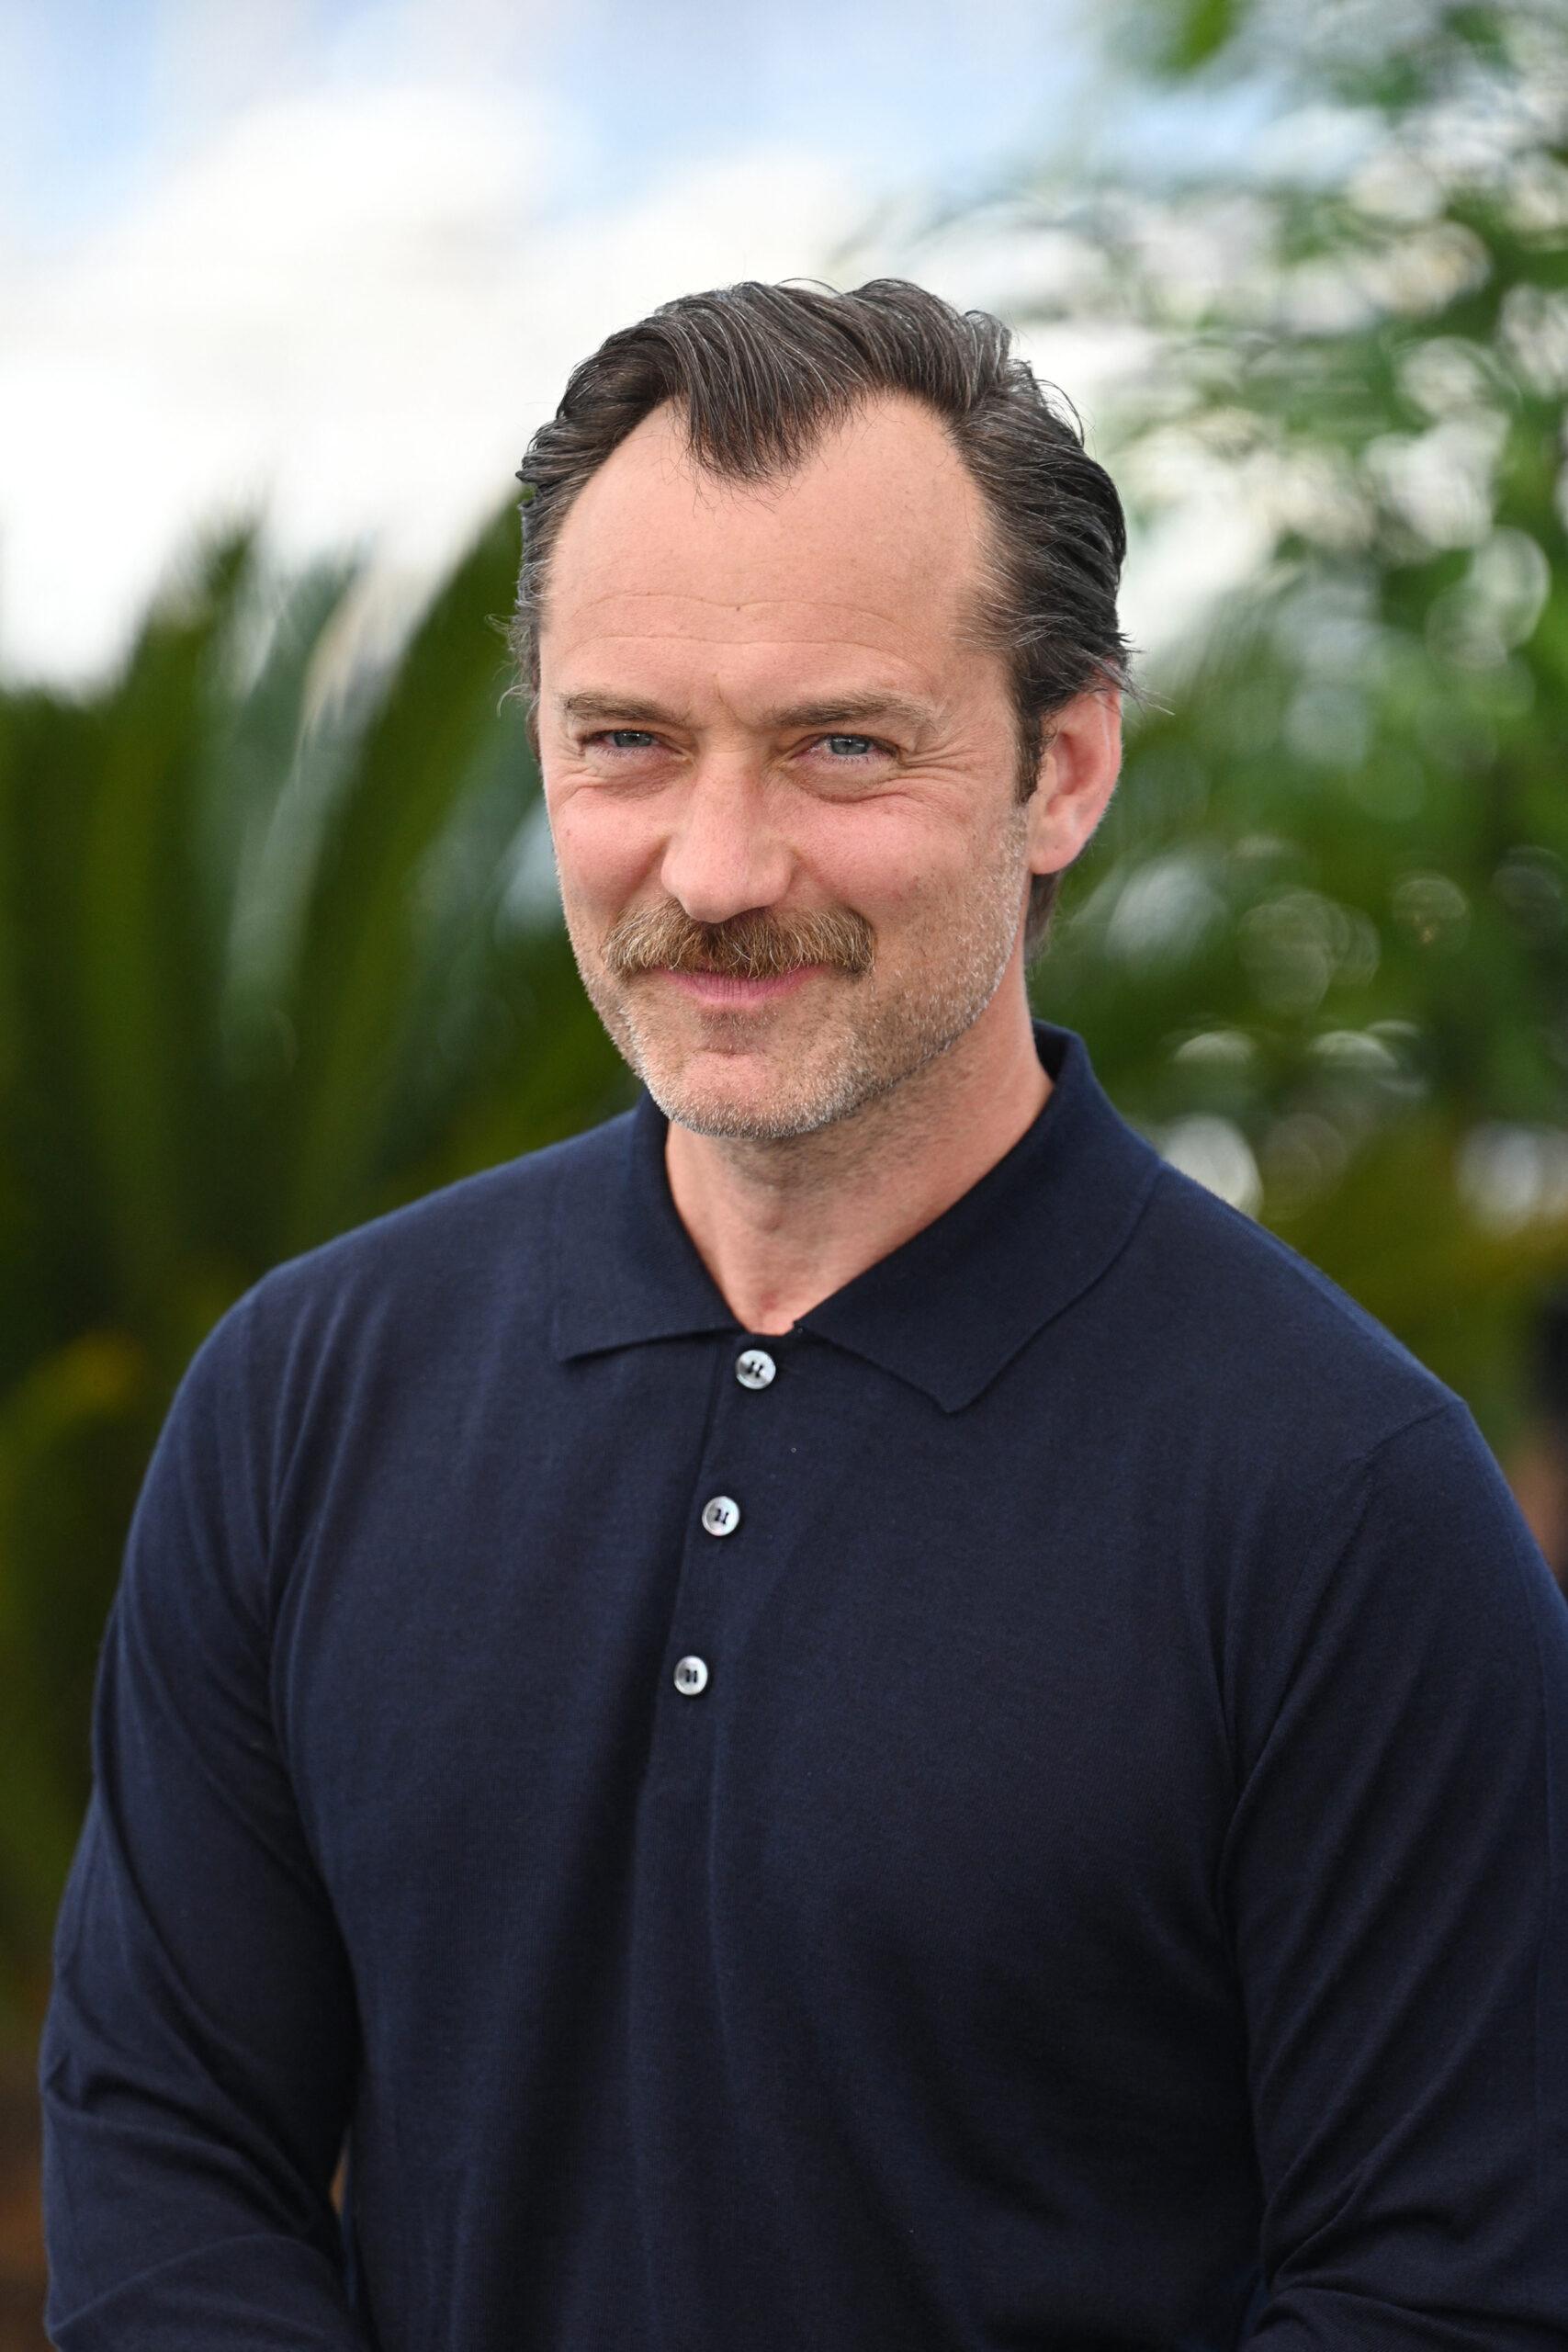 Jude Law at the 76th Cannes Film Festival